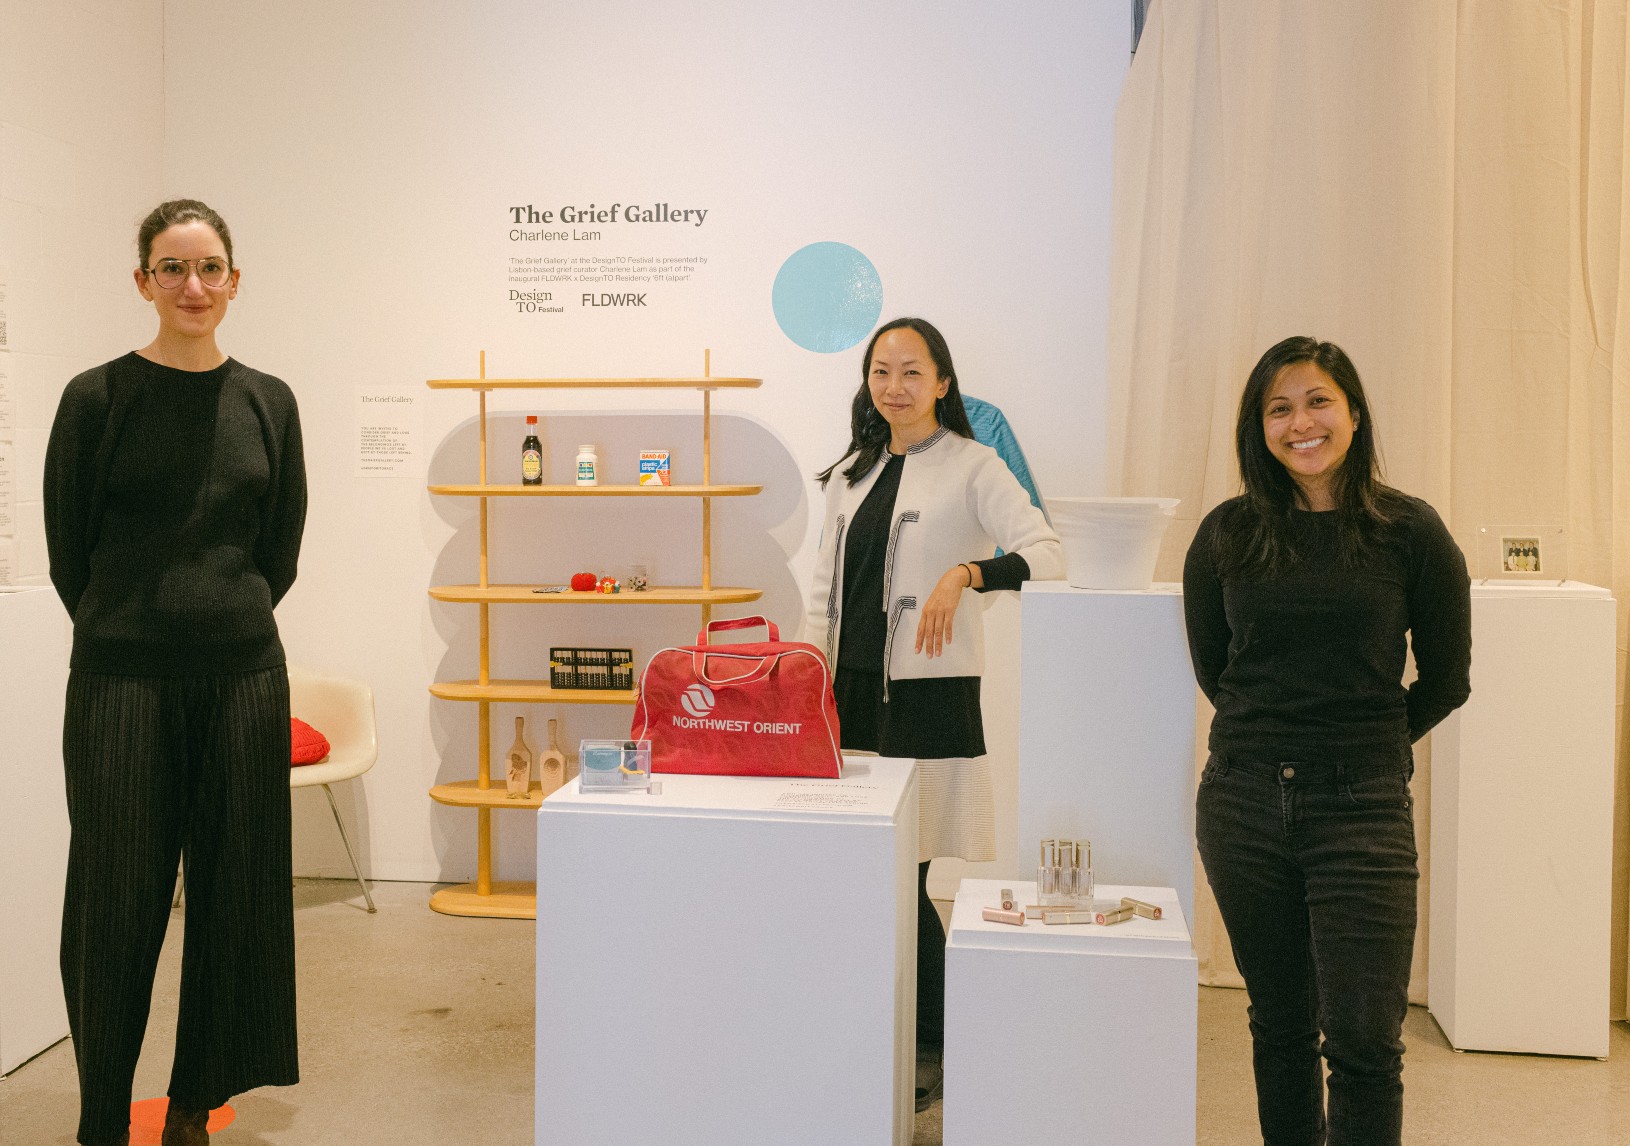 The Grief Gallery at DesignTO Festival